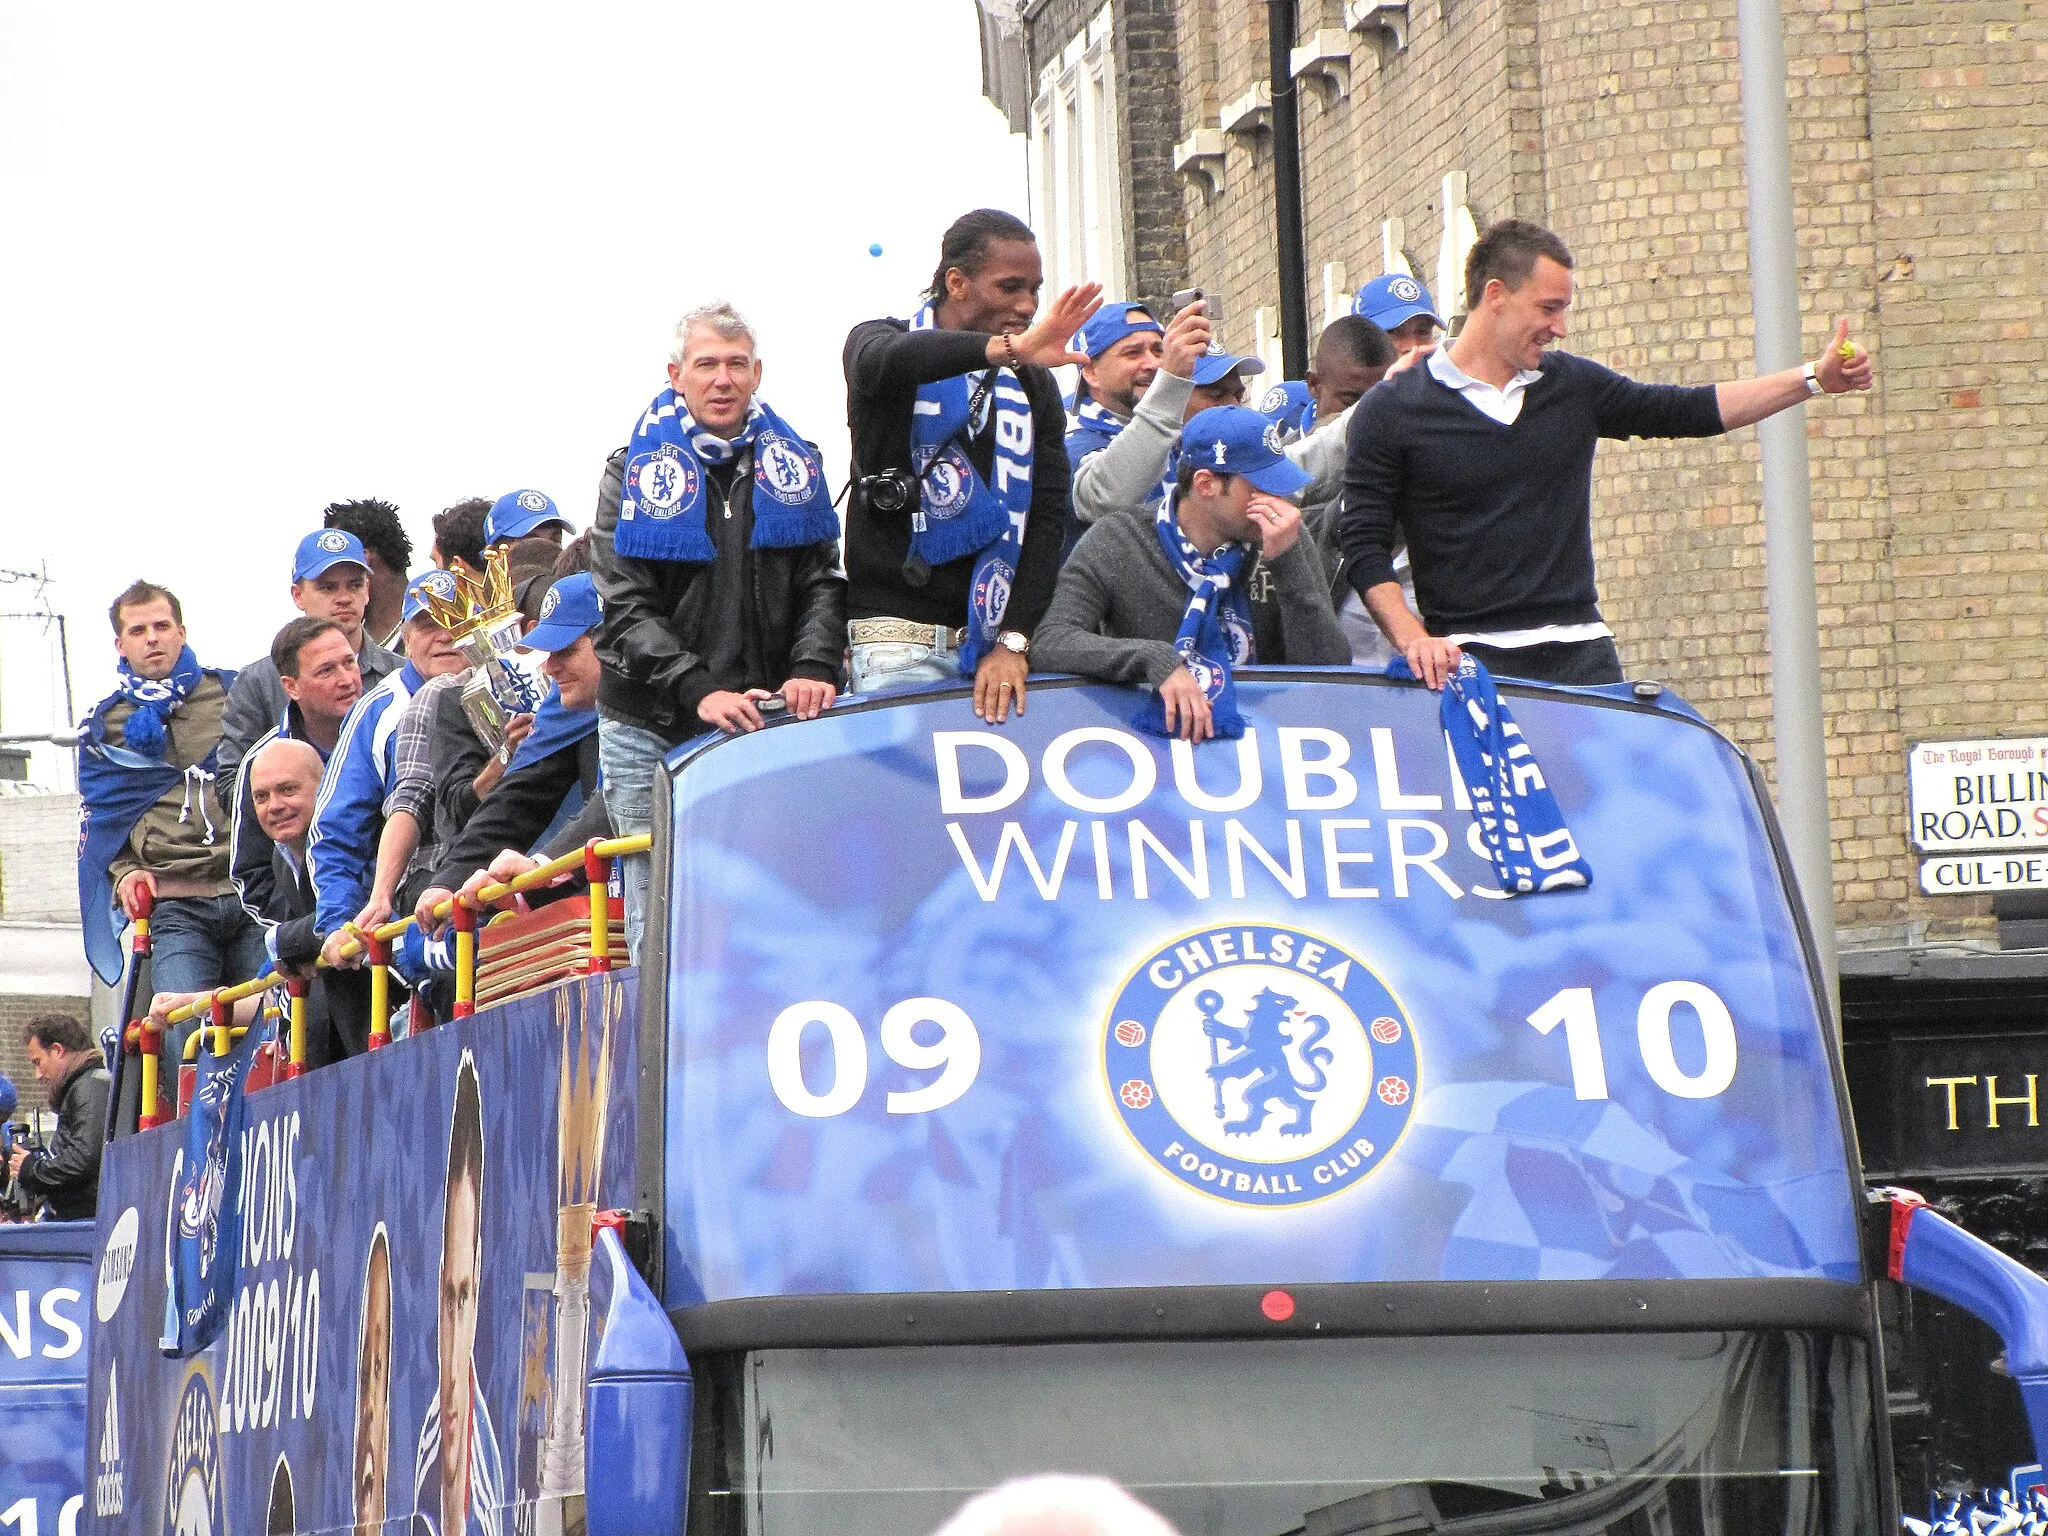 Photo showing: Chelsea FC parade through the streets of Fulham and Chelsea after winning their league and cup double, May 2010